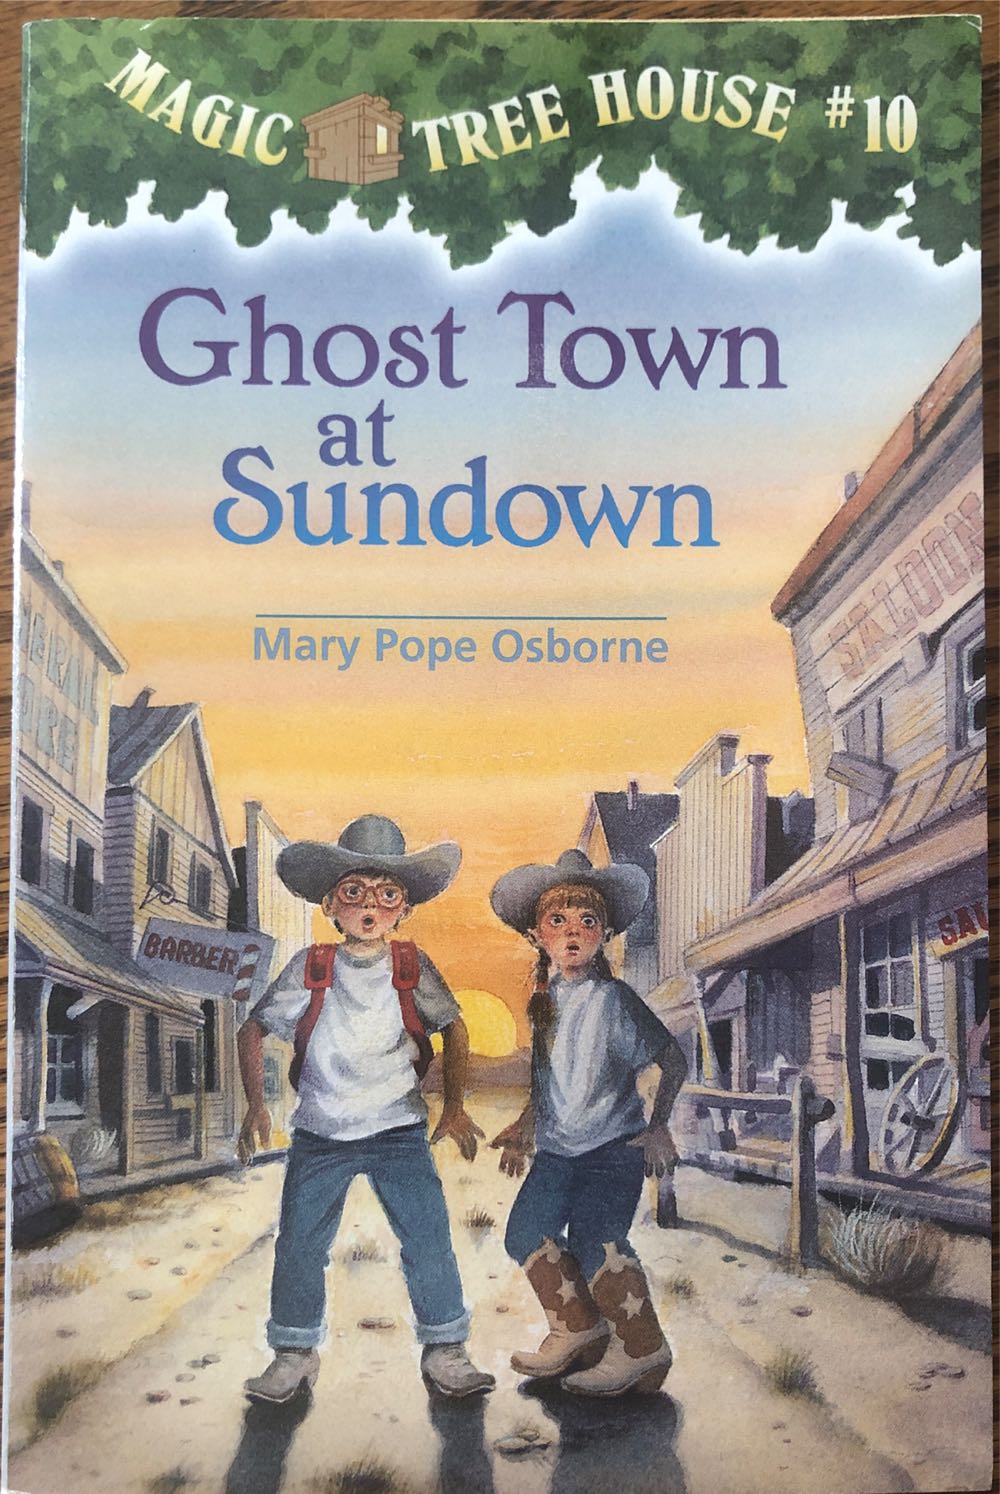 Magic Tree House #10: Ghost Town At Sundown - Mary Pope Osborne (Random House - Paperback) book collectible [Barcode 9780679883395] - Main Image 2